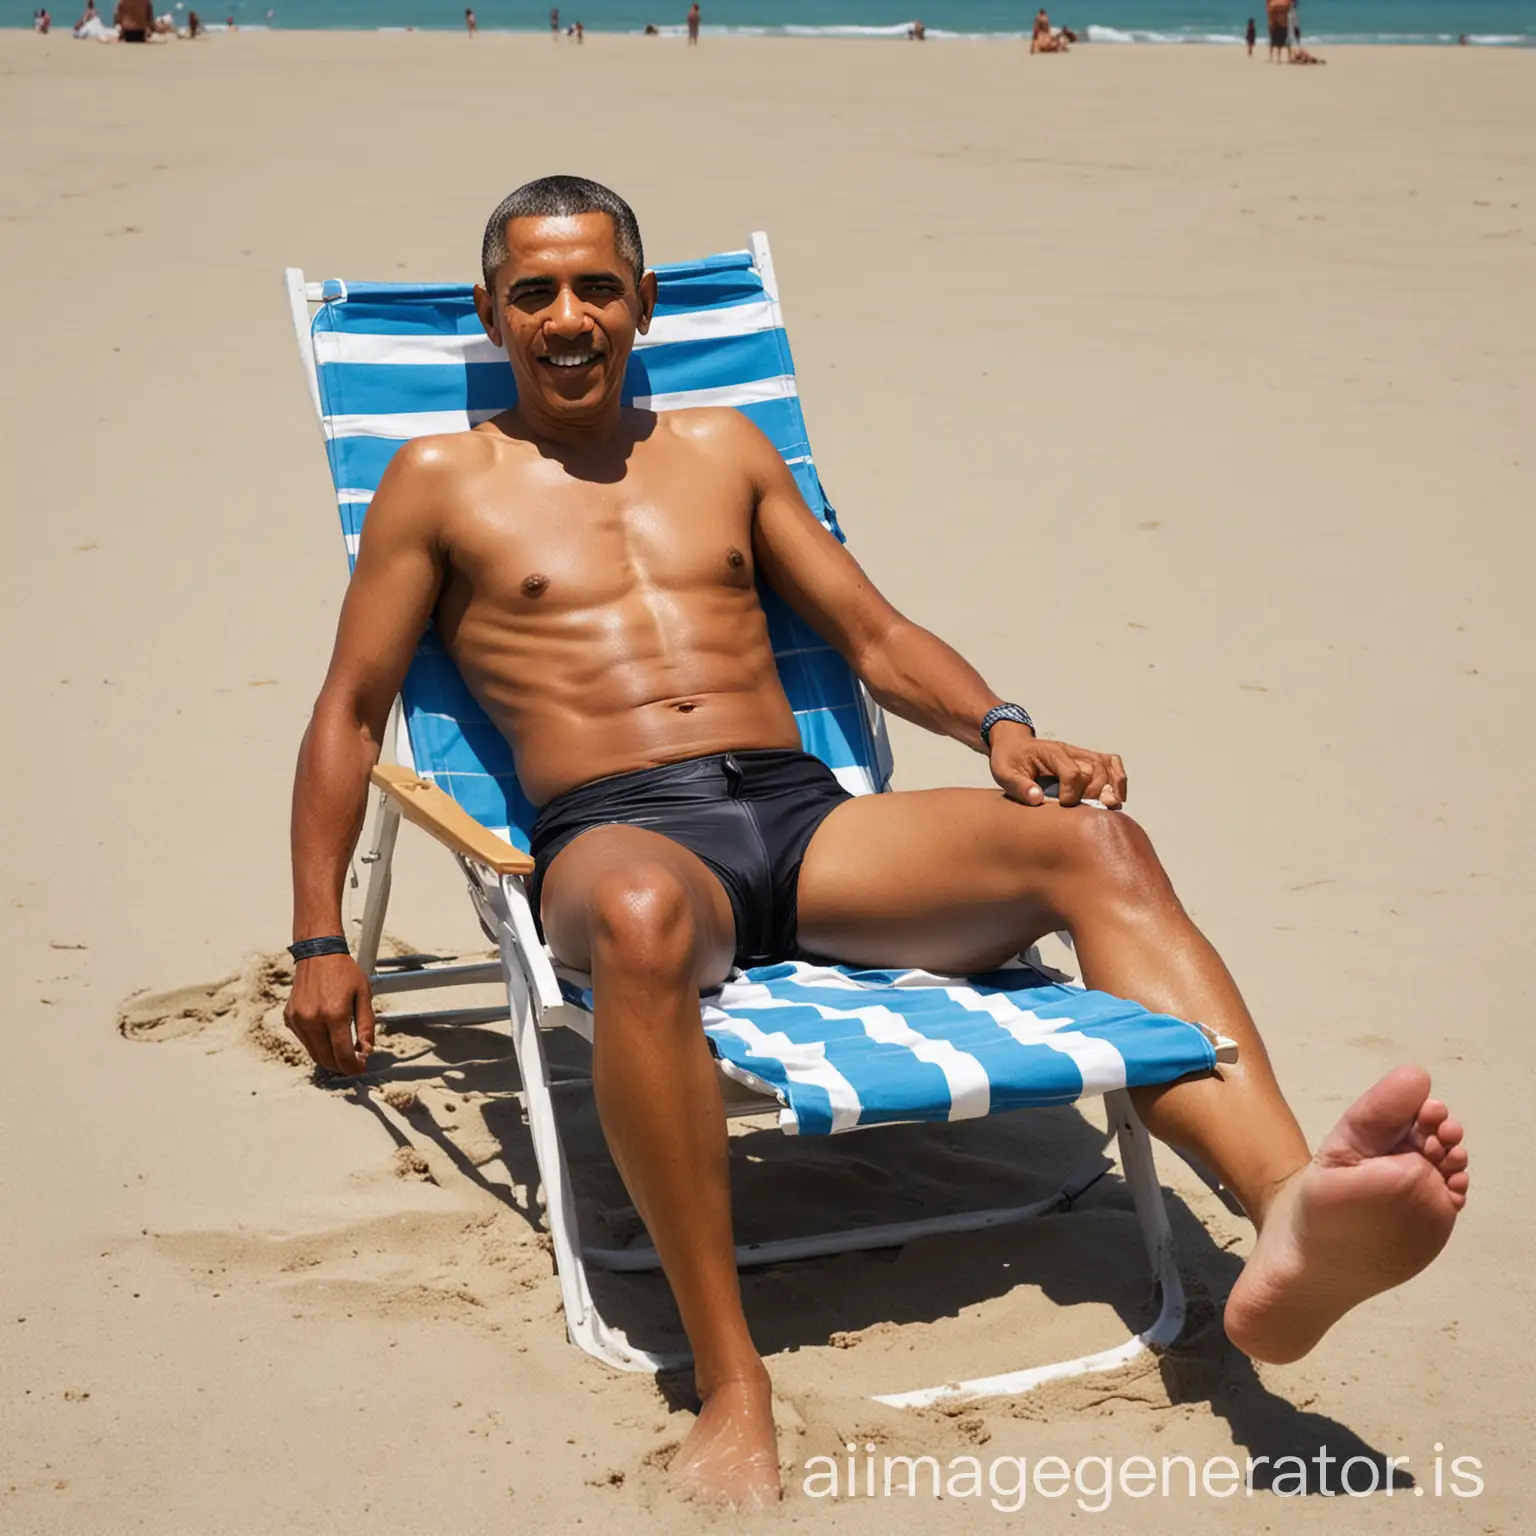 Create an image of obama in swim suit. Carrying beach chair